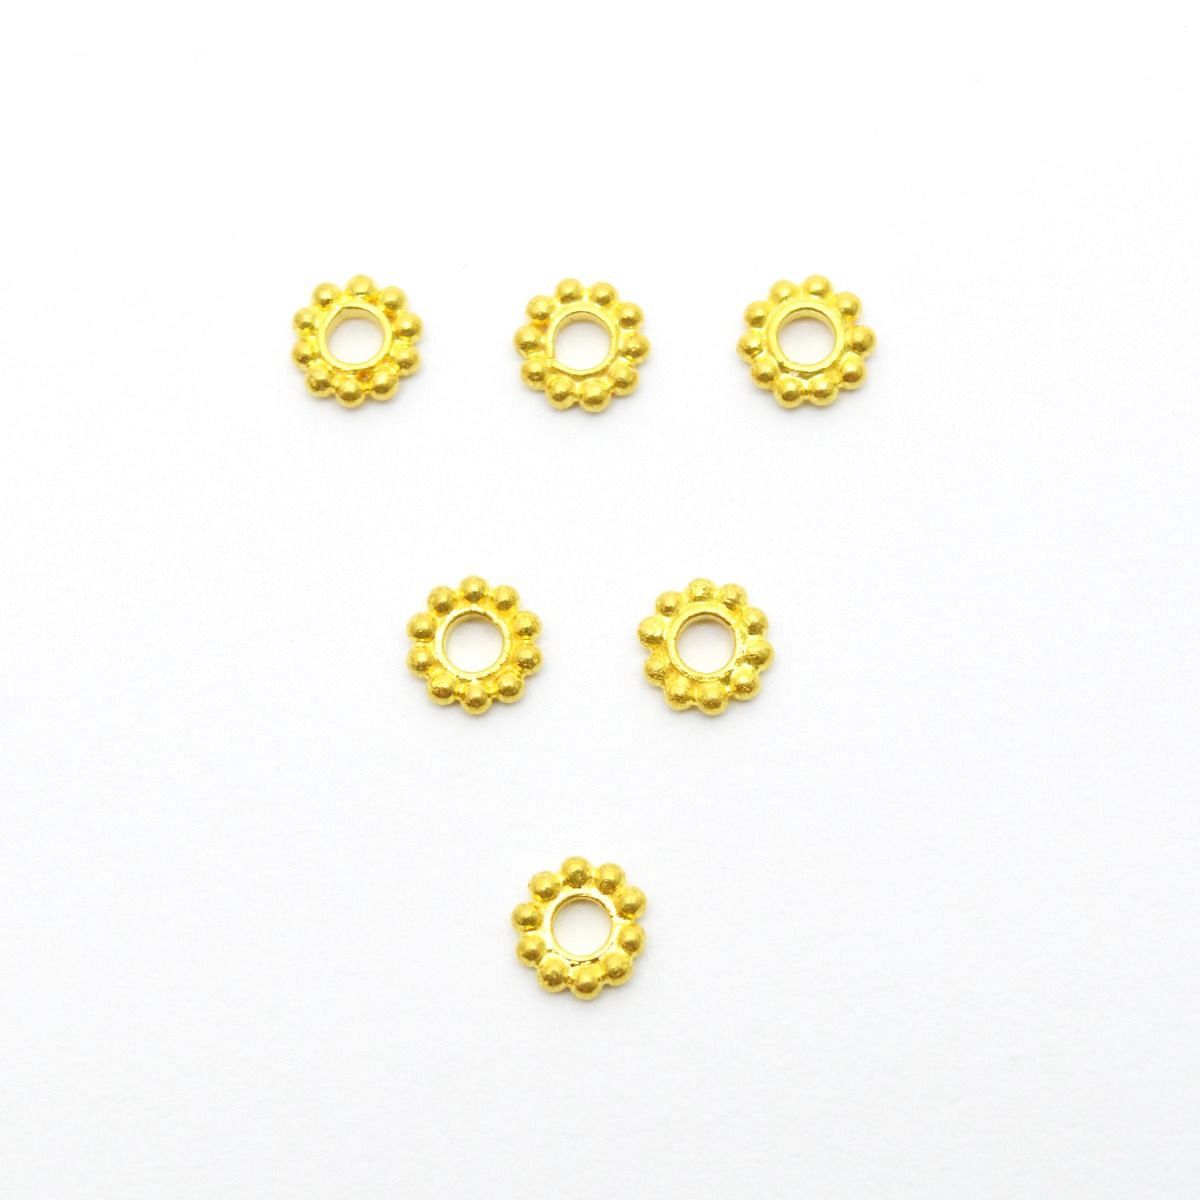 5 PIECES 18K GOLD BEADS FOR JEWELRY PURELY HANDMADE DESIGN JEWELRY MAKING